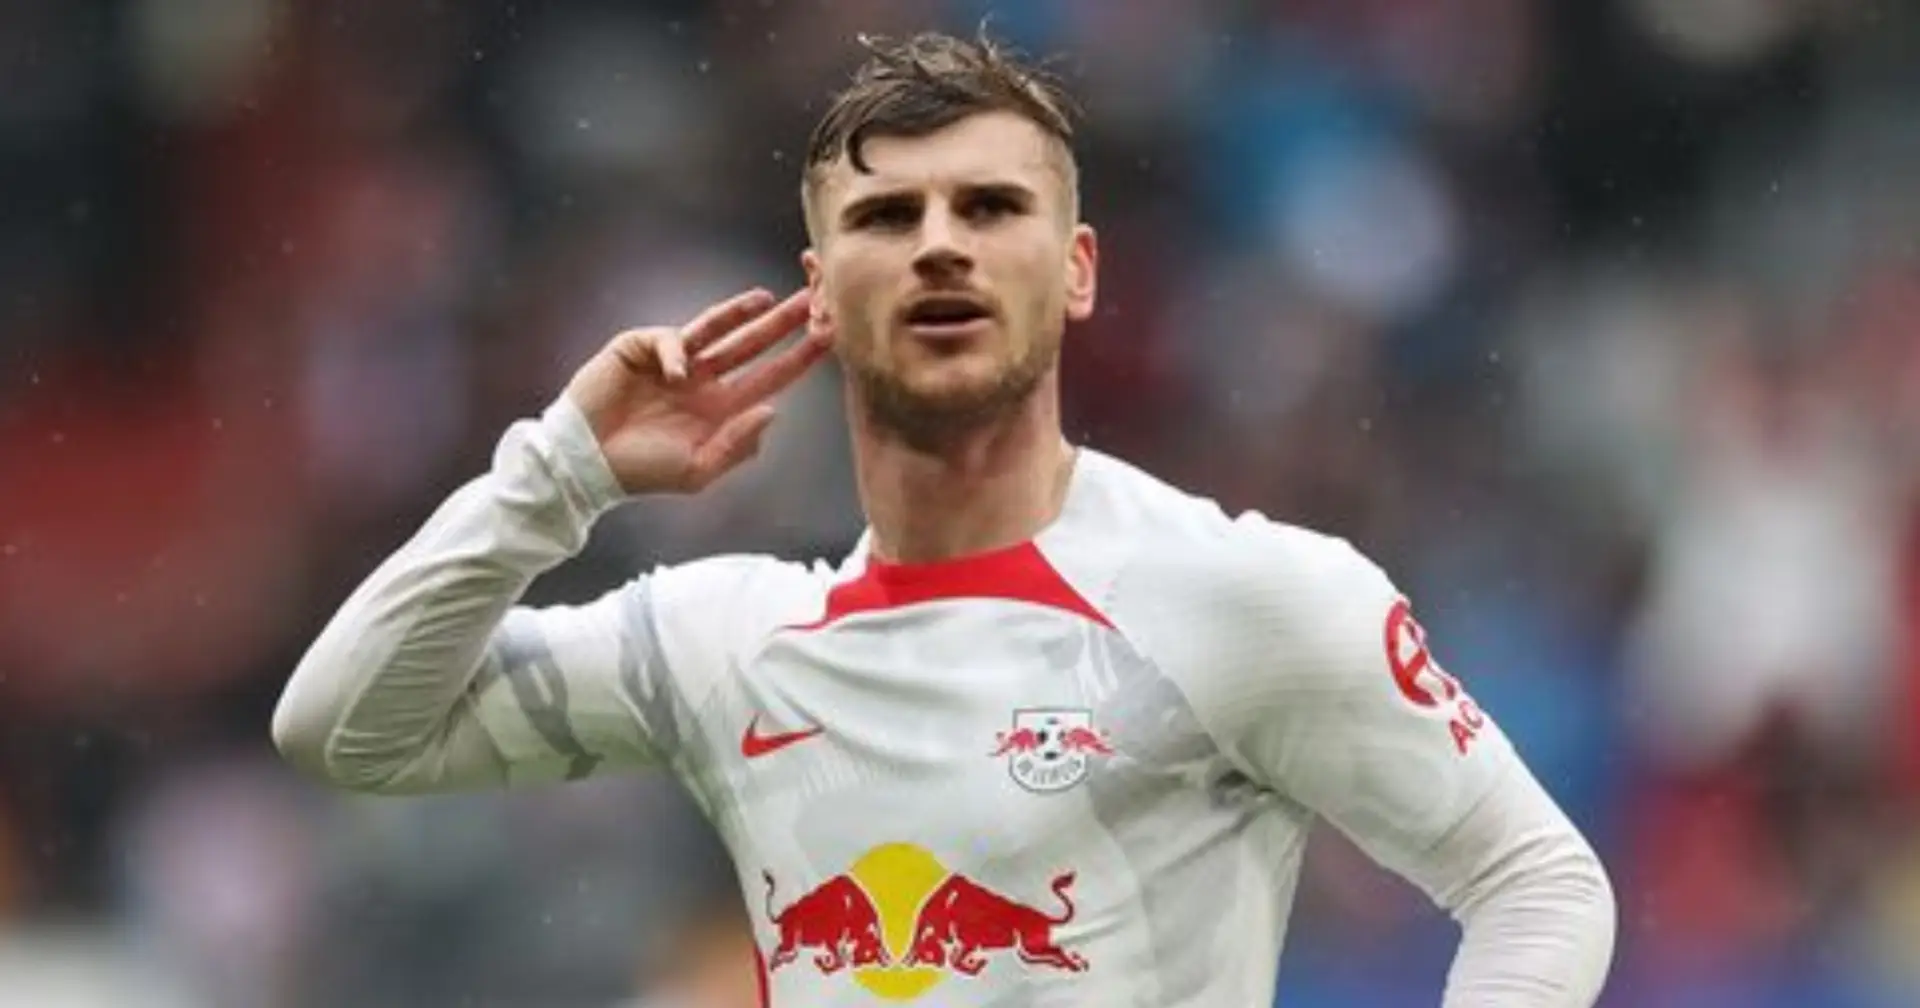 16 goals scored last season — what are Spurs getting in Timo Werner?